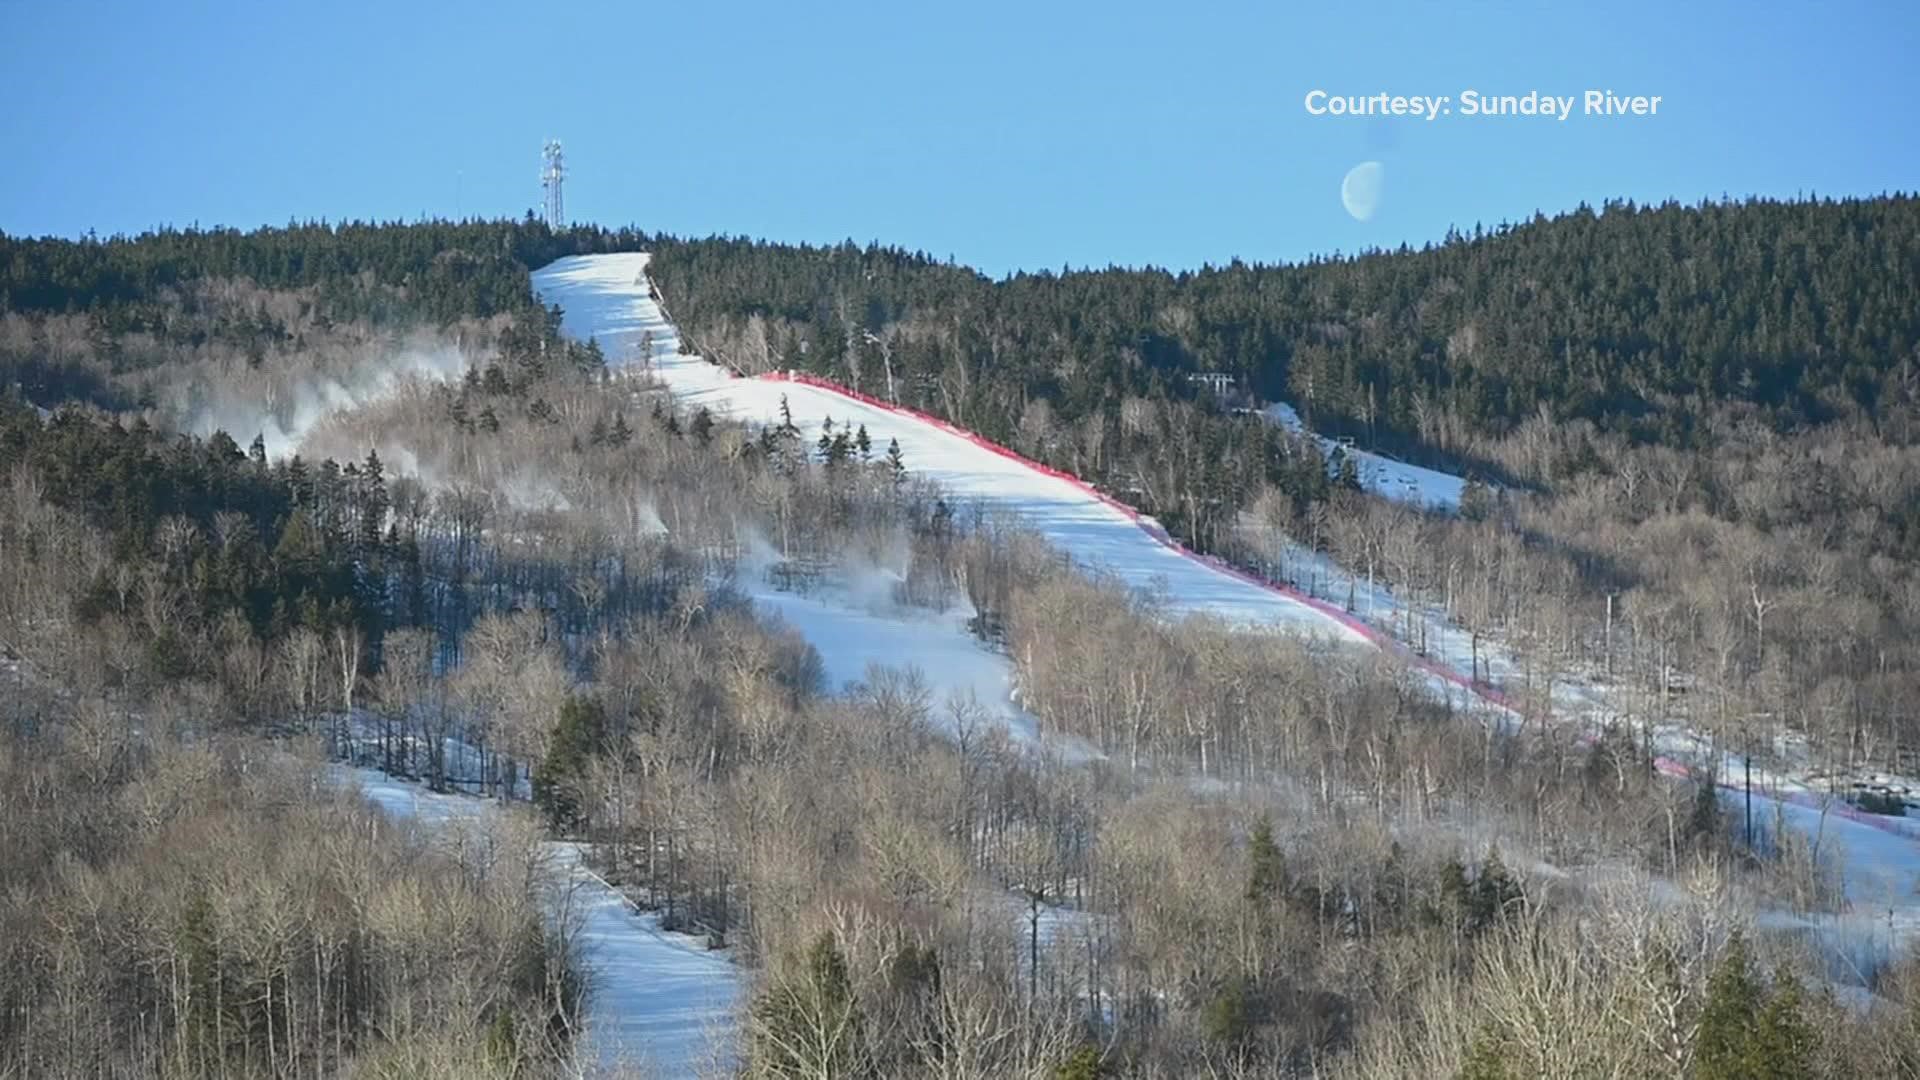 Snow guns blazing in March is not the norm but has become that way in the last few years.